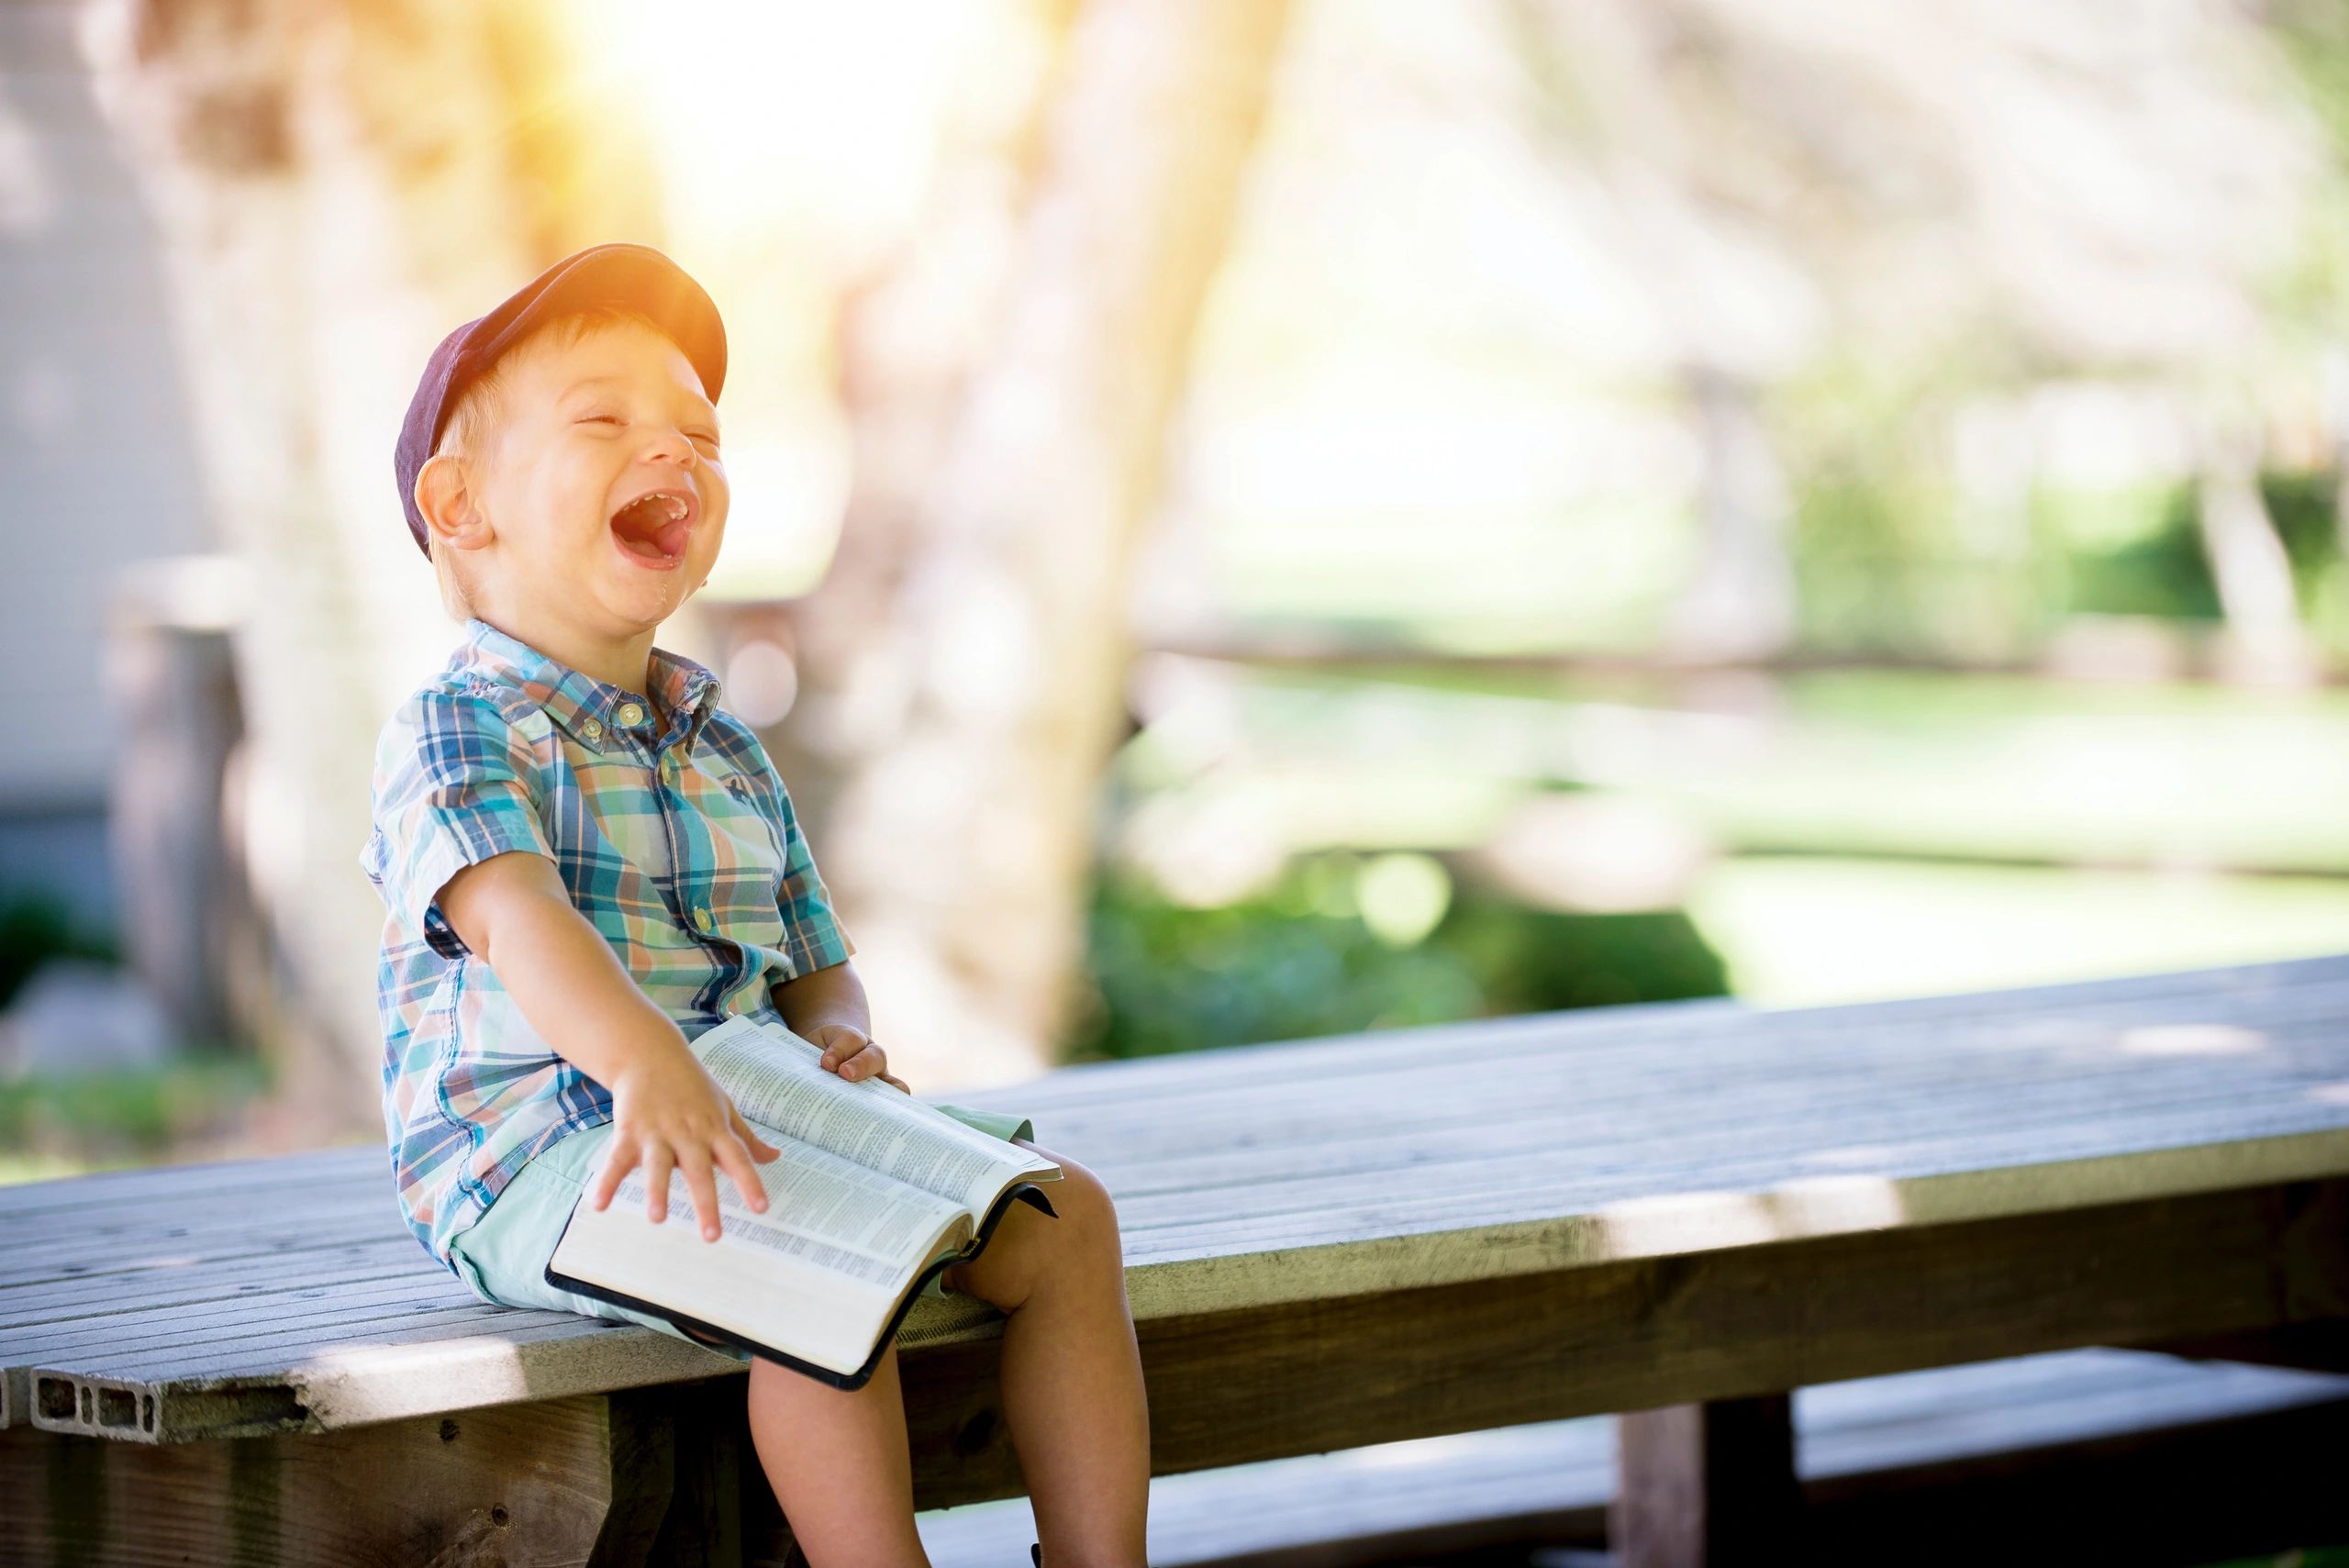 Laughing young boy with Down Syndrome